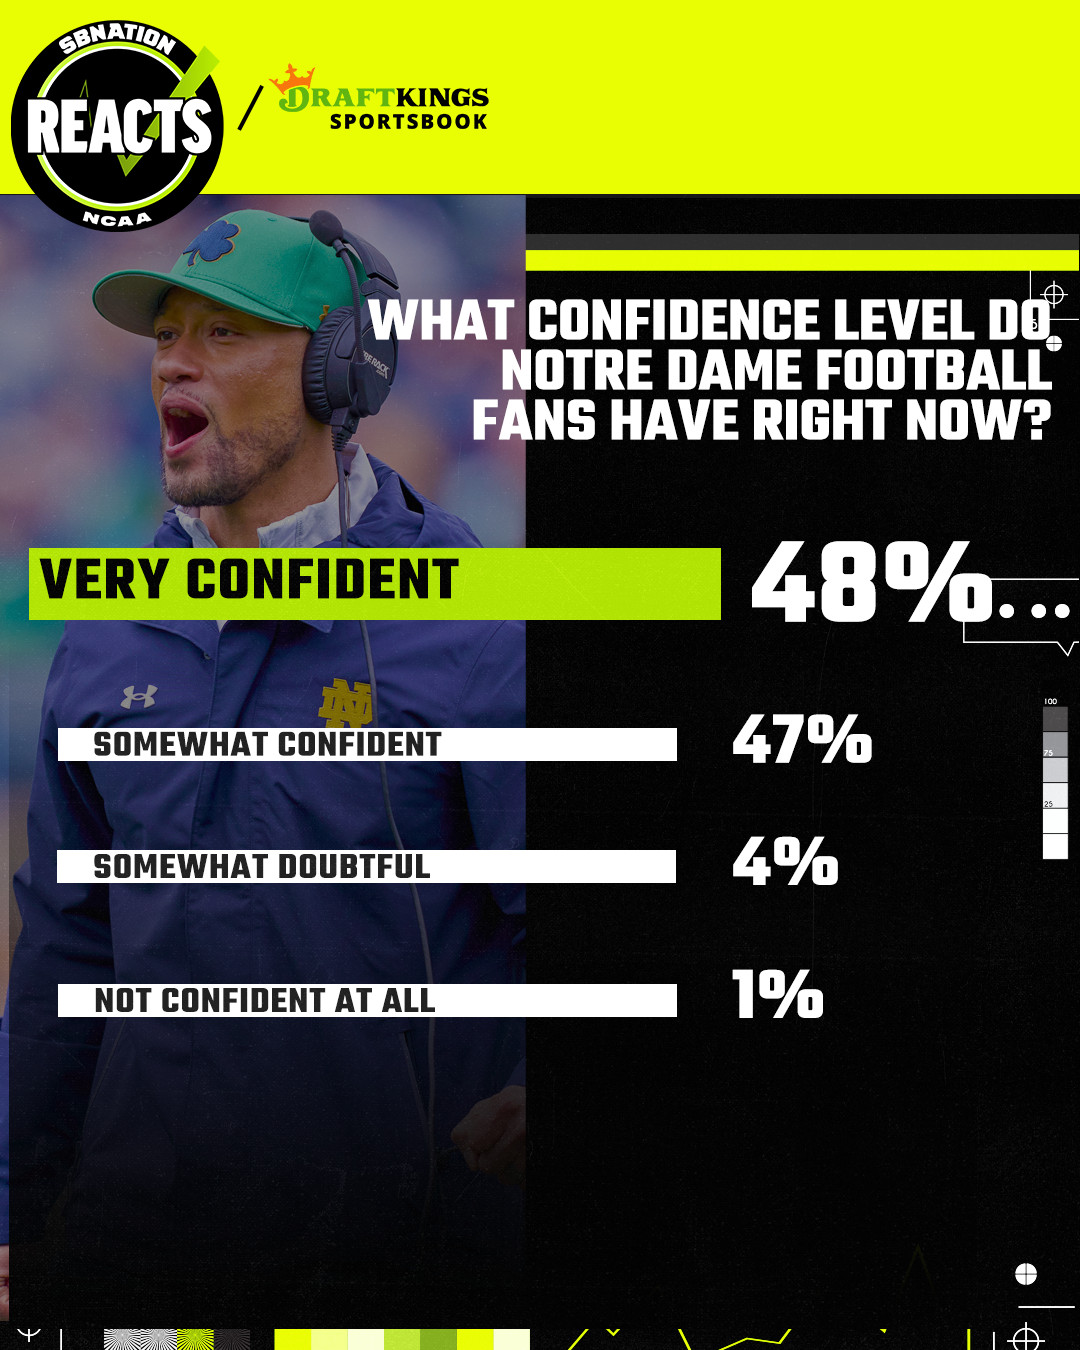 What confidence level do Notre Dame football fans have right now? Forty-eight percent very confident. Forty-seven percent somewhat confident.